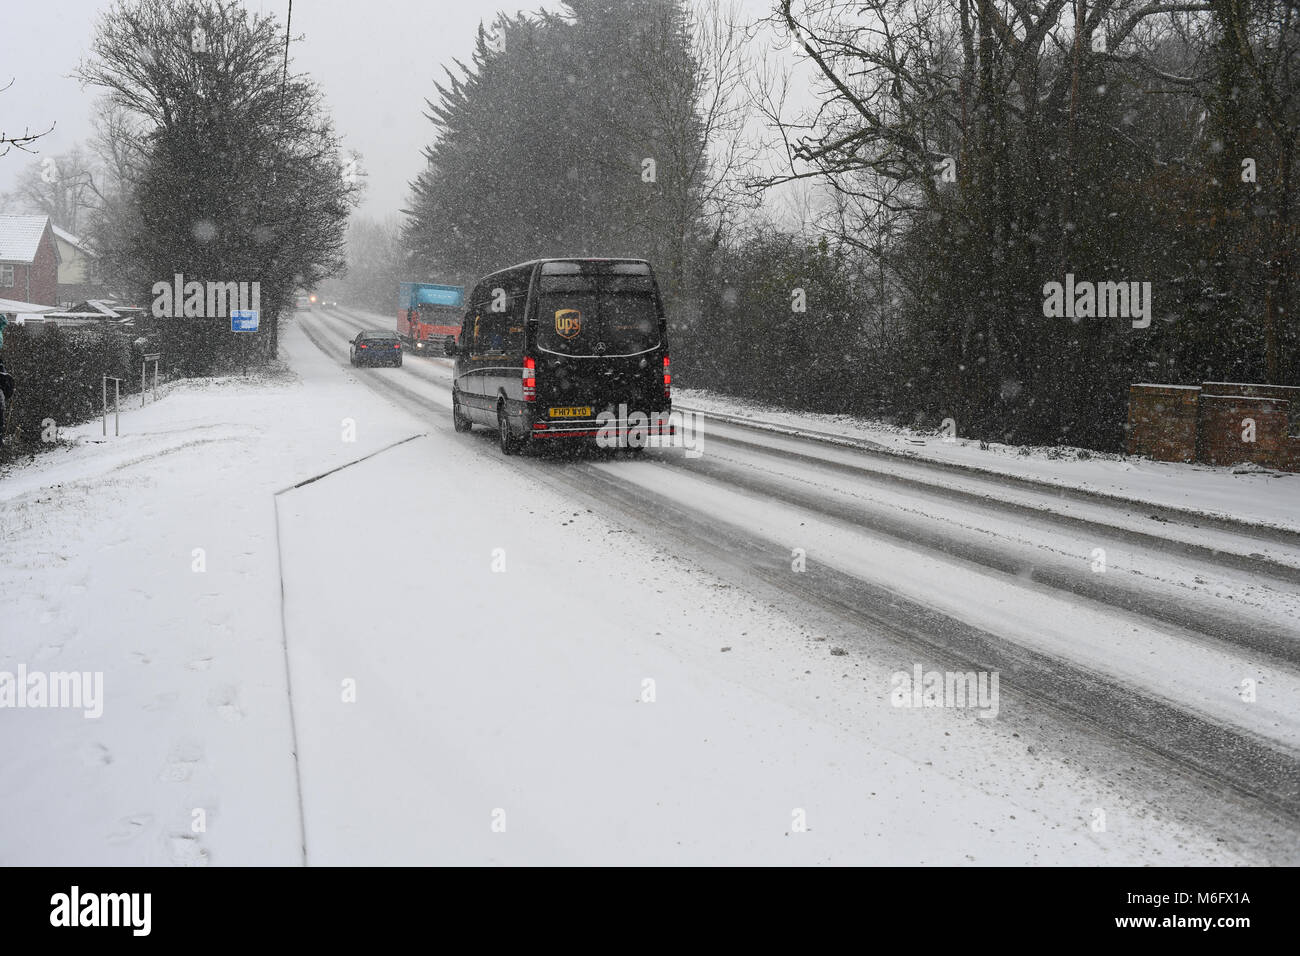 A UPS van makes its way along the A36 in treacherous snowy conditions during the March 2018  snow storm. Stock Photo